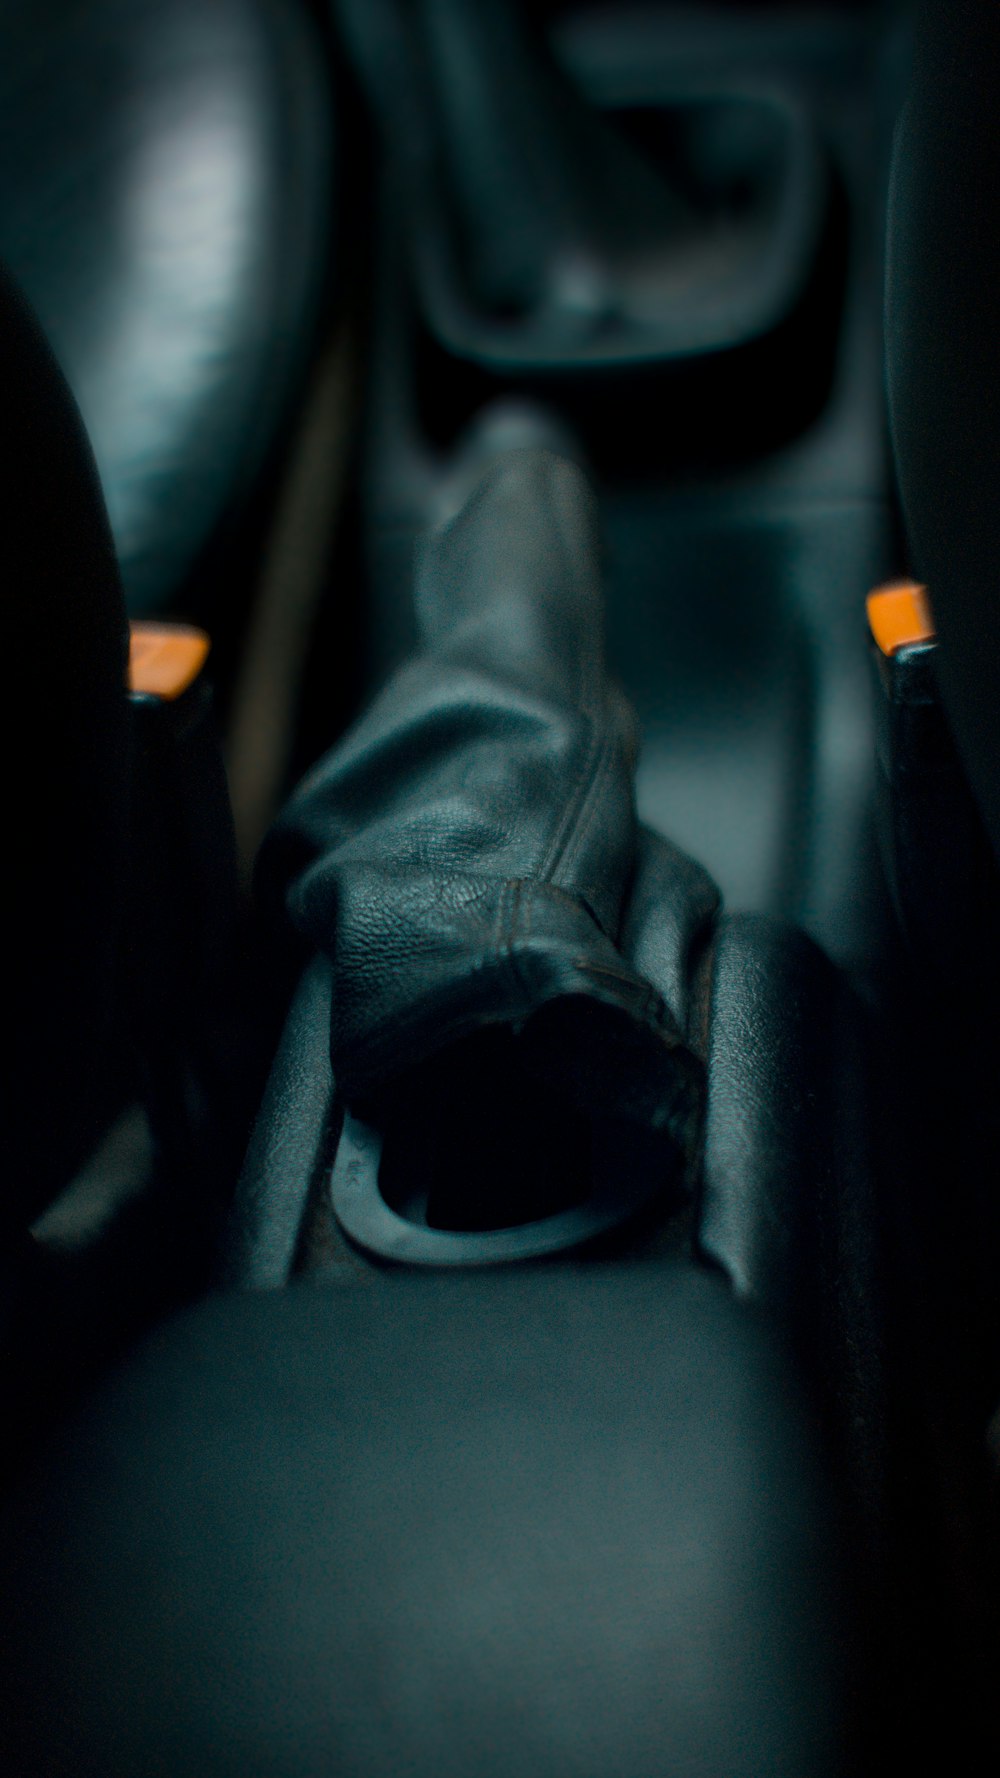 a pair of black leather gloves sitting on top of a seat